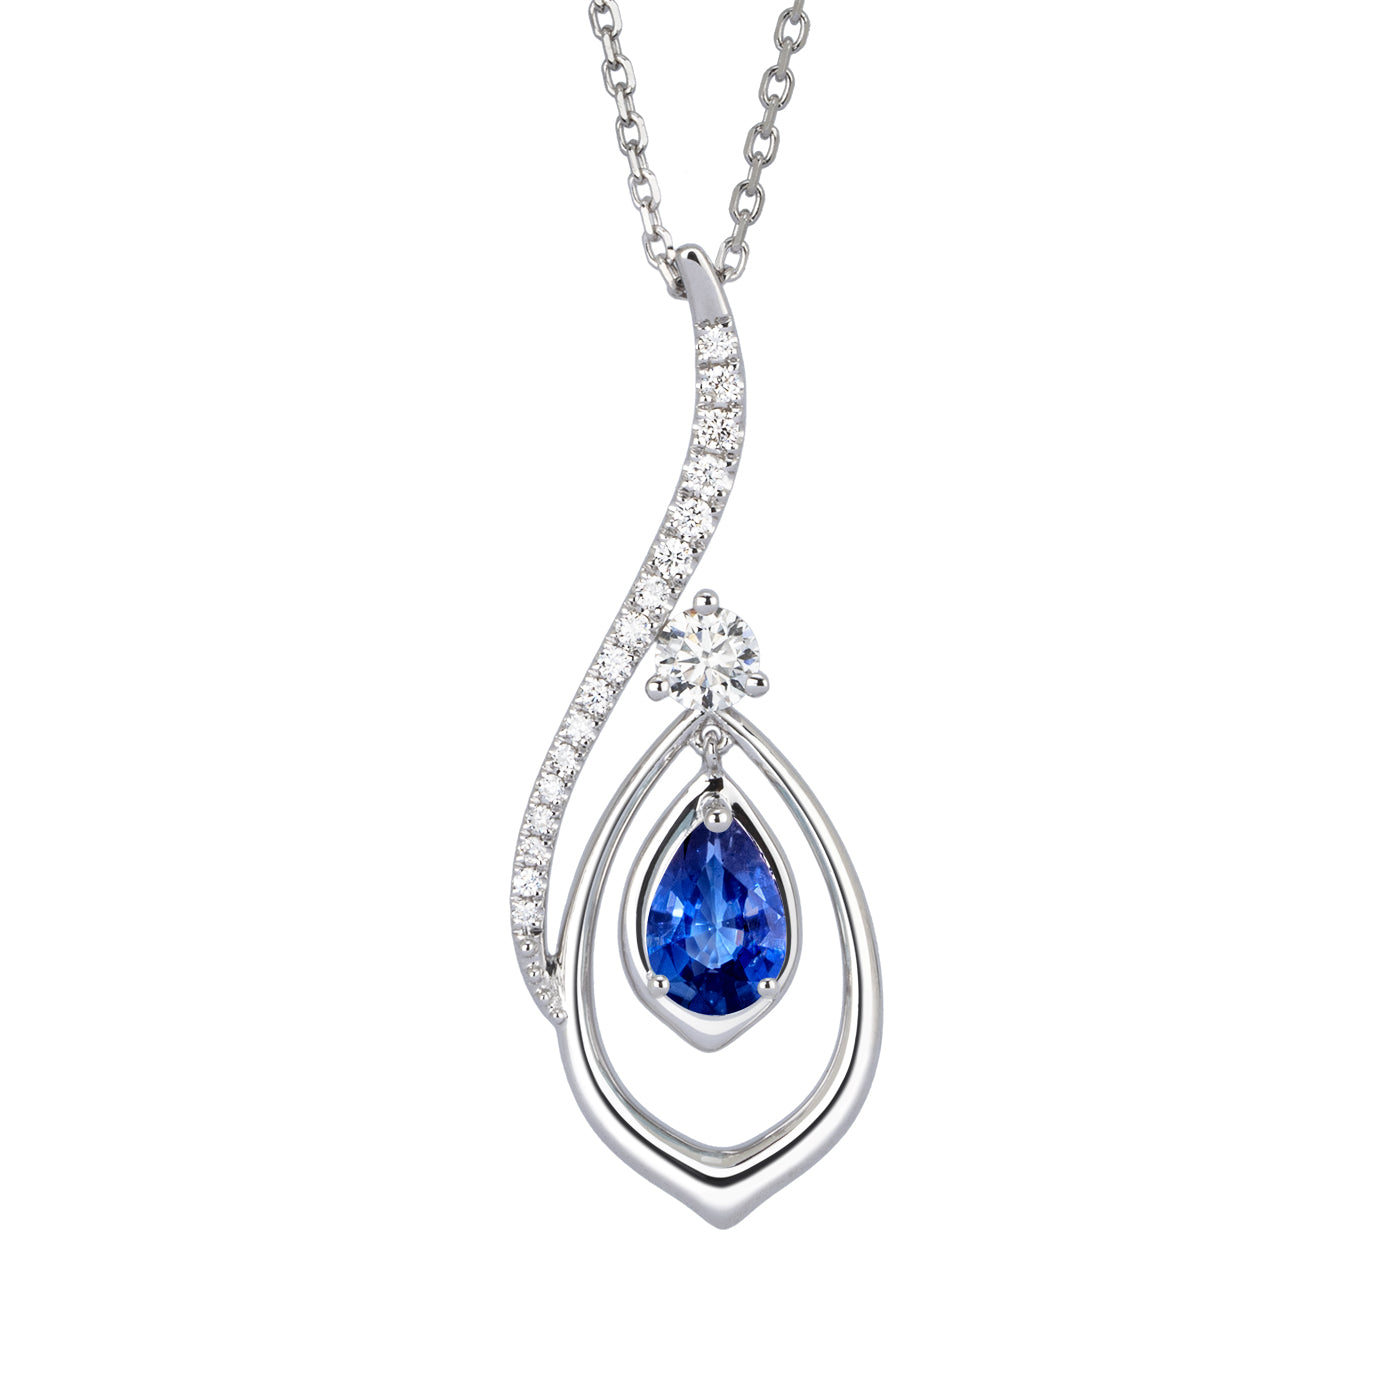 The Heavenly Phoenix Fine Jewelry Necklace with Sapphire | Shen Yun Shop